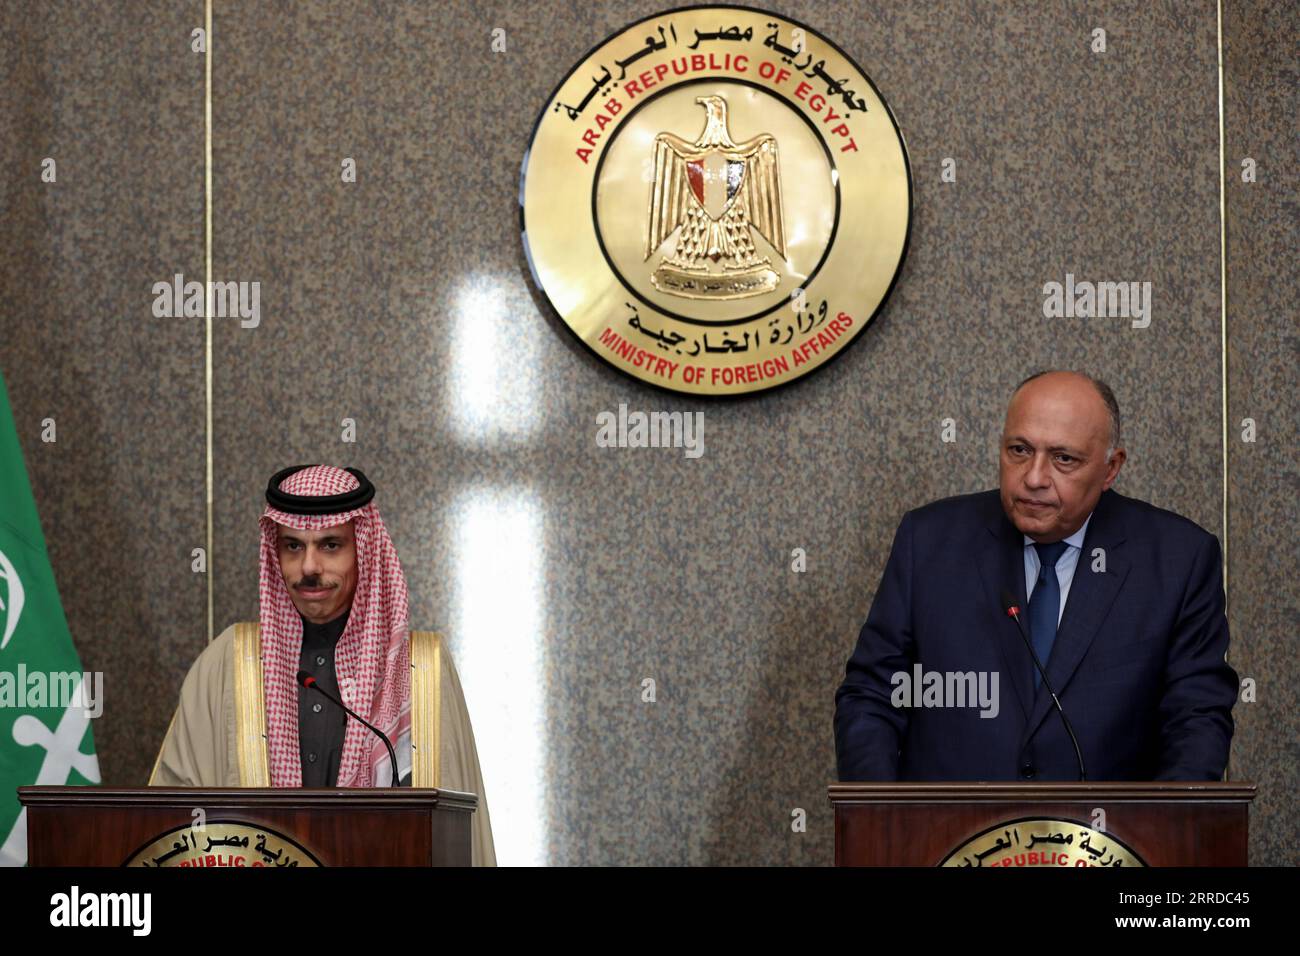 211216 -- CAIRO, Dec. 16, 2021  -- Egyptian Foreign Minister Sameh Shoukry R and Saudi Arabian Foreign Minister Prince Faisal bin Farhan Al Saud attend a joint press conference after their meeting in Cairo, Egypt, on Dec. 16, 2021. Egyptian Foreign Minister Sameh Shoukry and his Saudi Arabian counterpart Prince Faisal bin Farhan Al Saud on Thursday agreed to boost cooperation in maintaining regional security and stability. Str/ EGYPT-CAIRO-FM-SAUDI FM-MEETING Xinhua PUBLICATIONxNOTxINxCHN Stock Photo